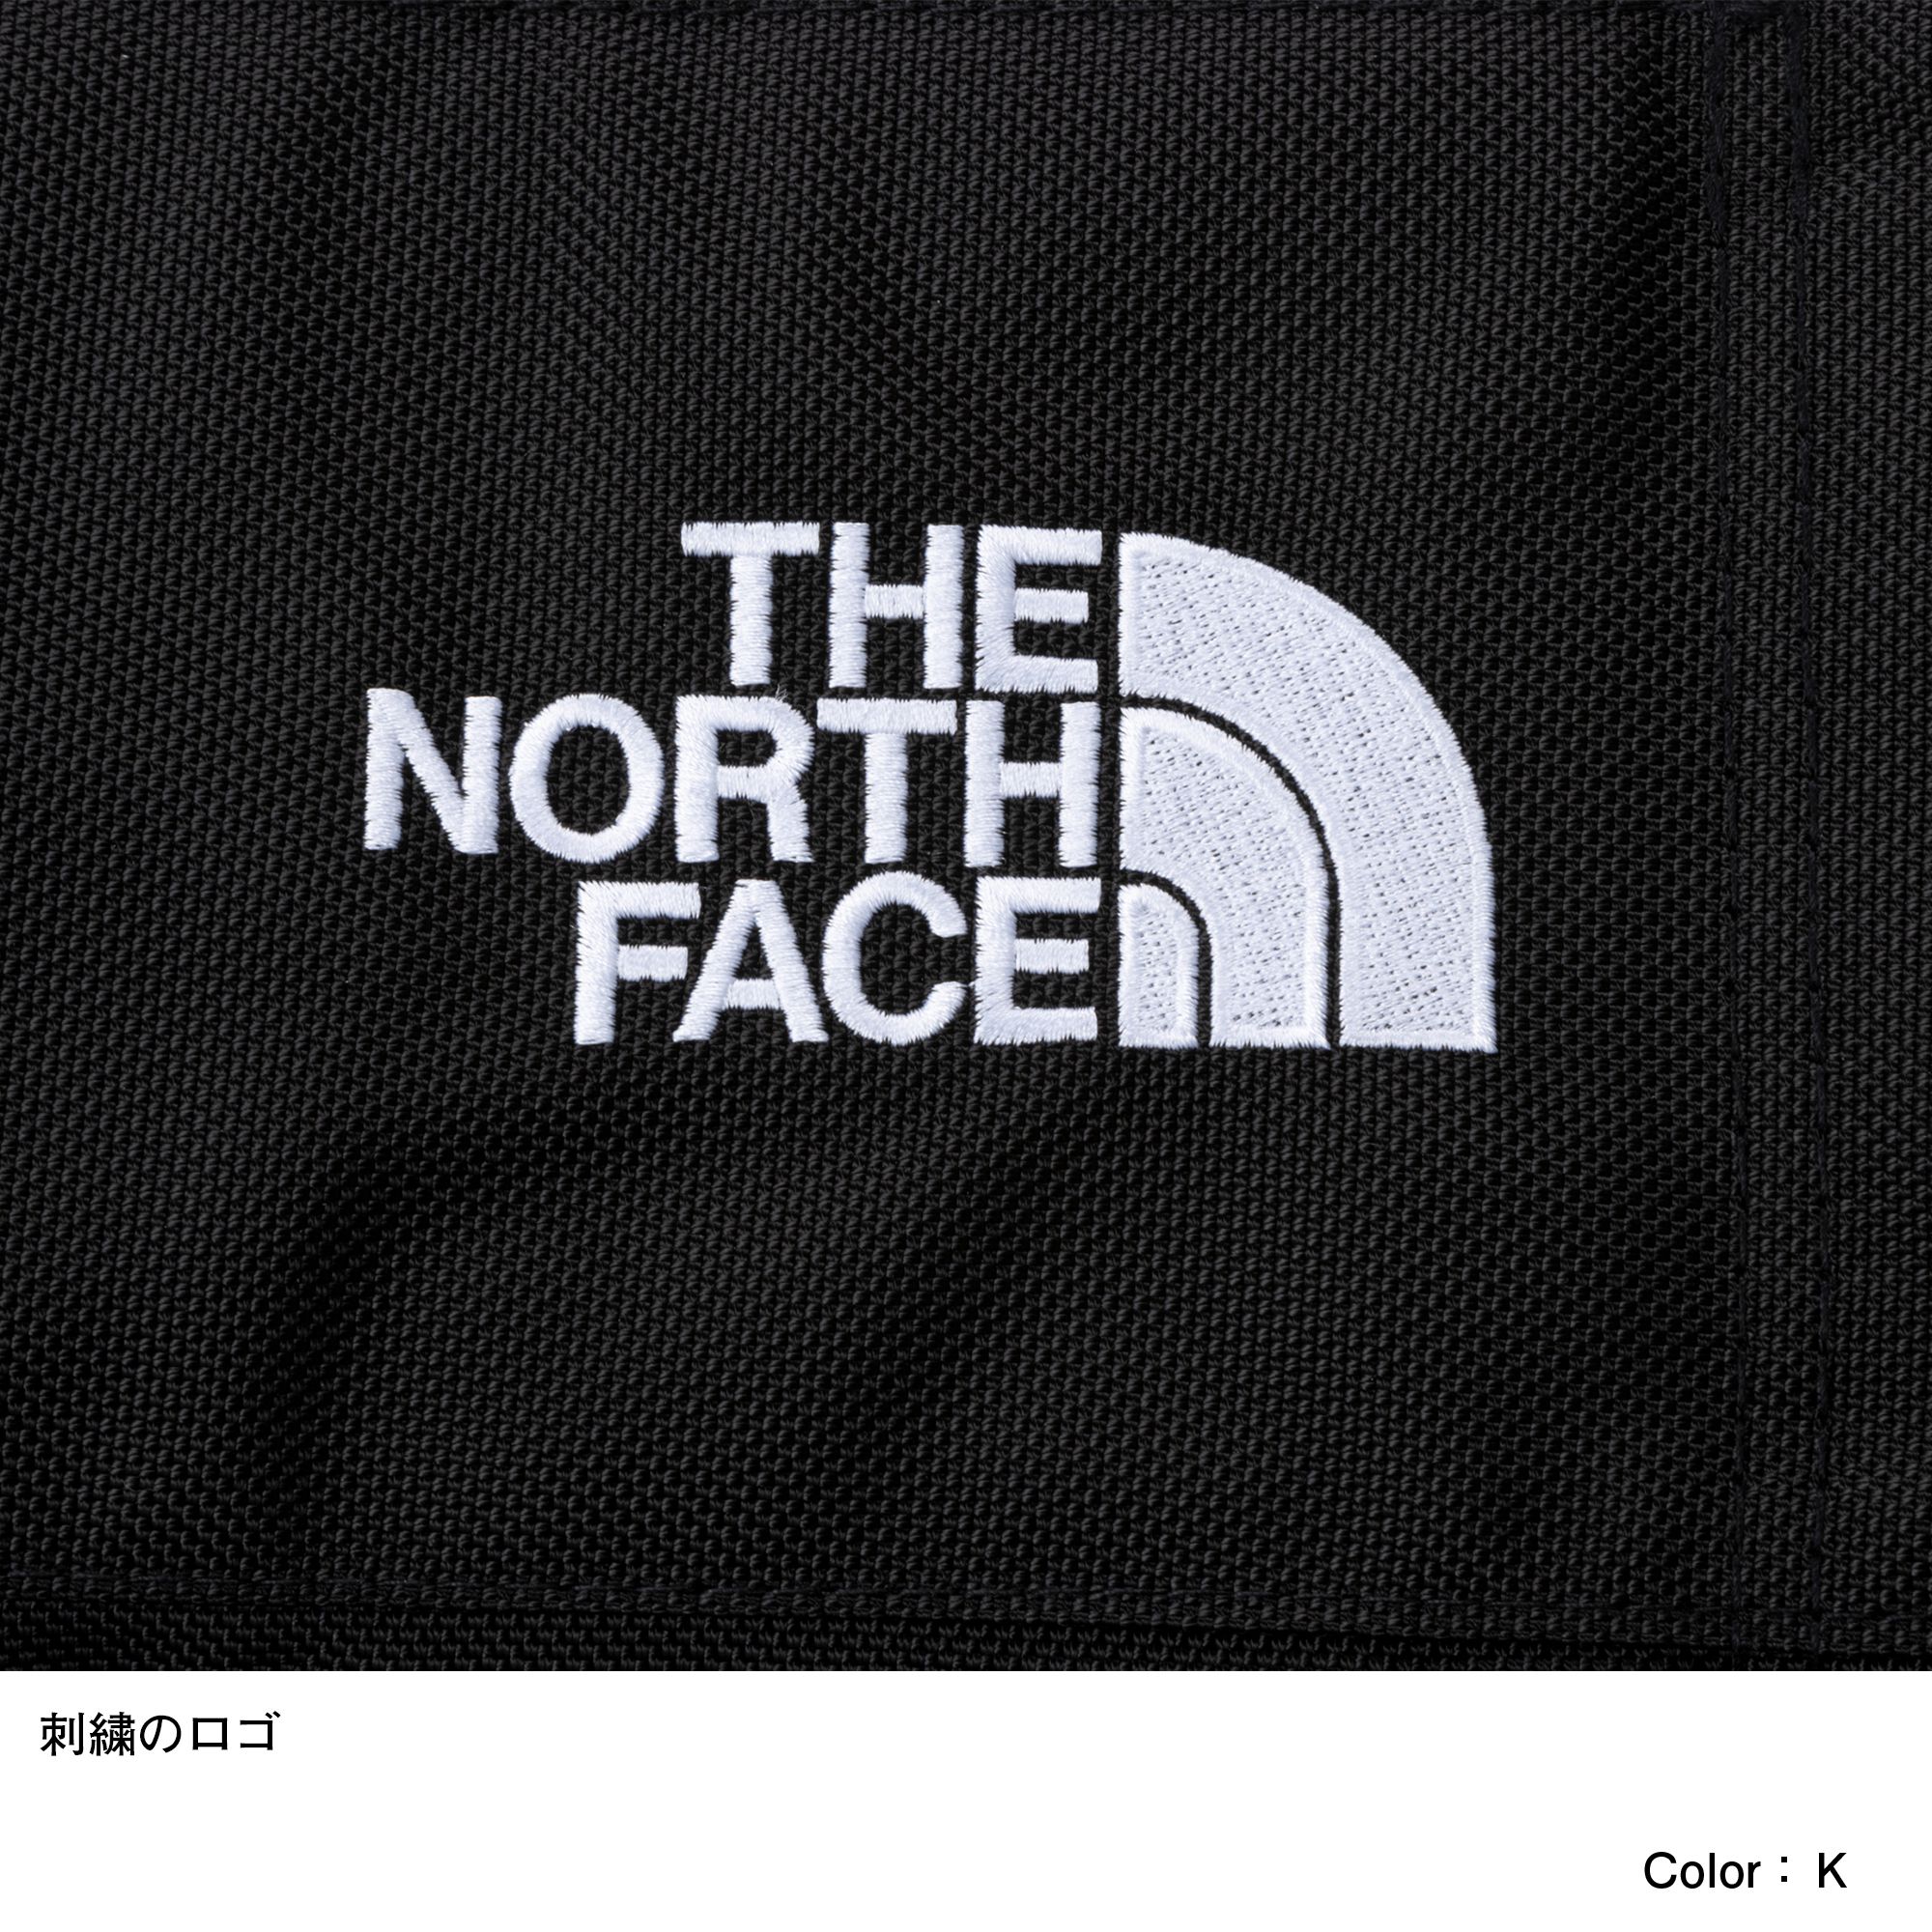 TNFキャンプチェアスリム（NN32201）- THE NORTH FACE公式通販